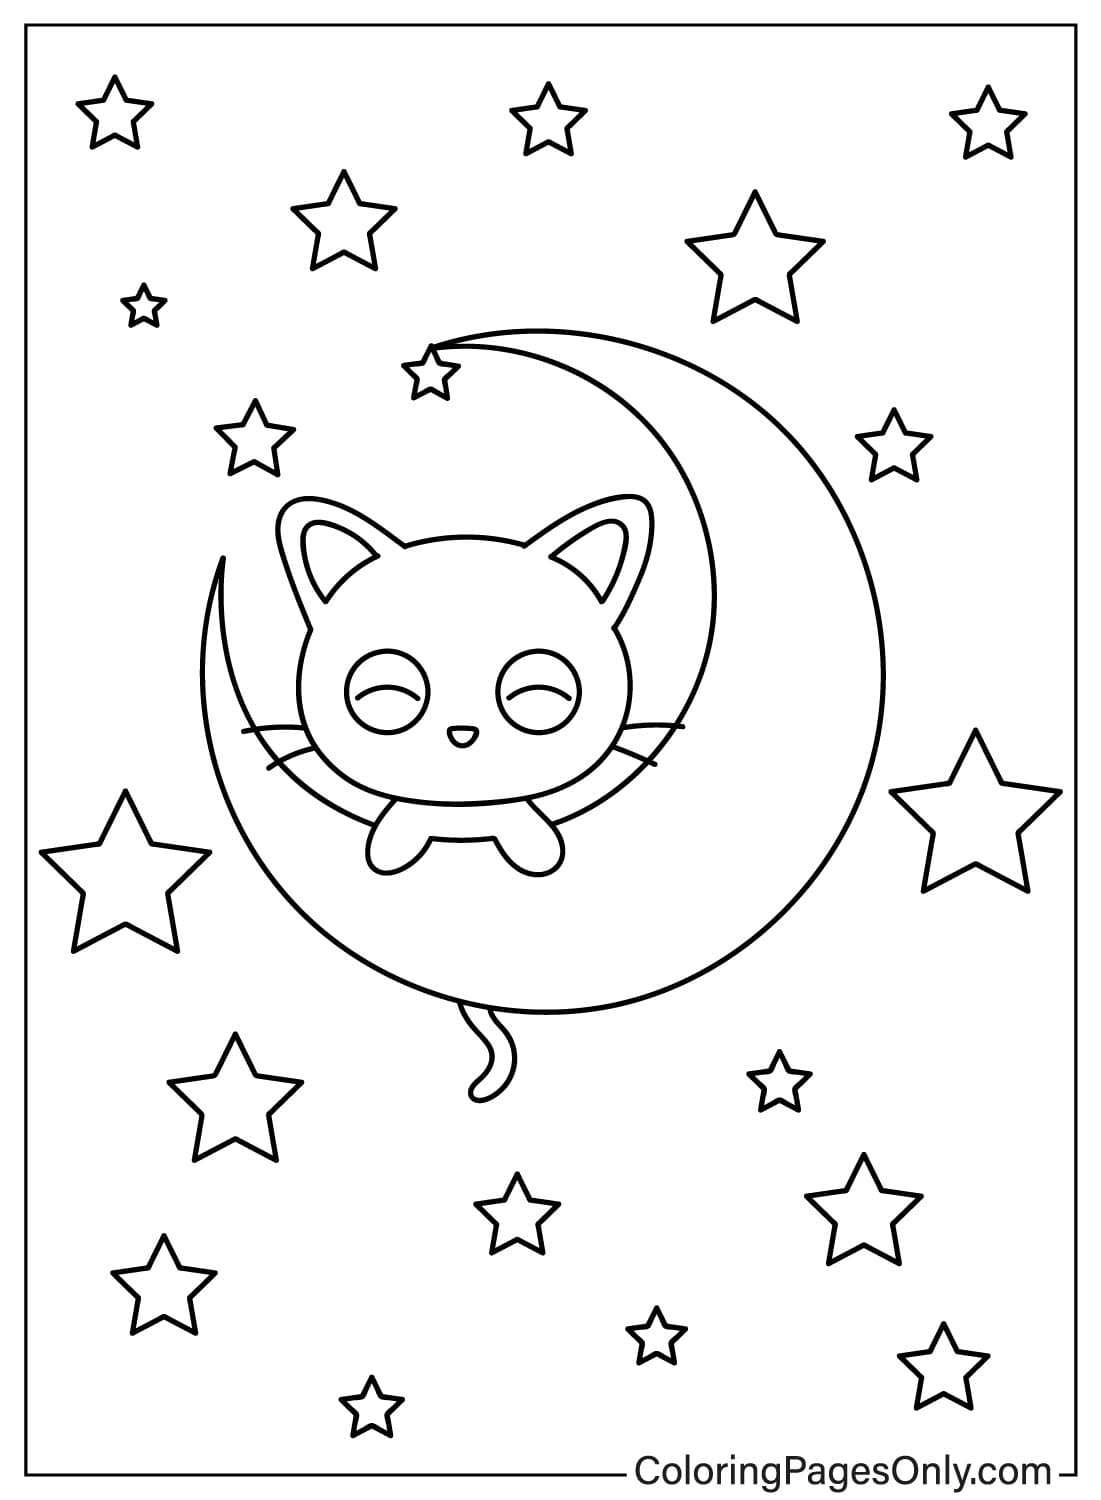 16+ Chococat Coloring Page